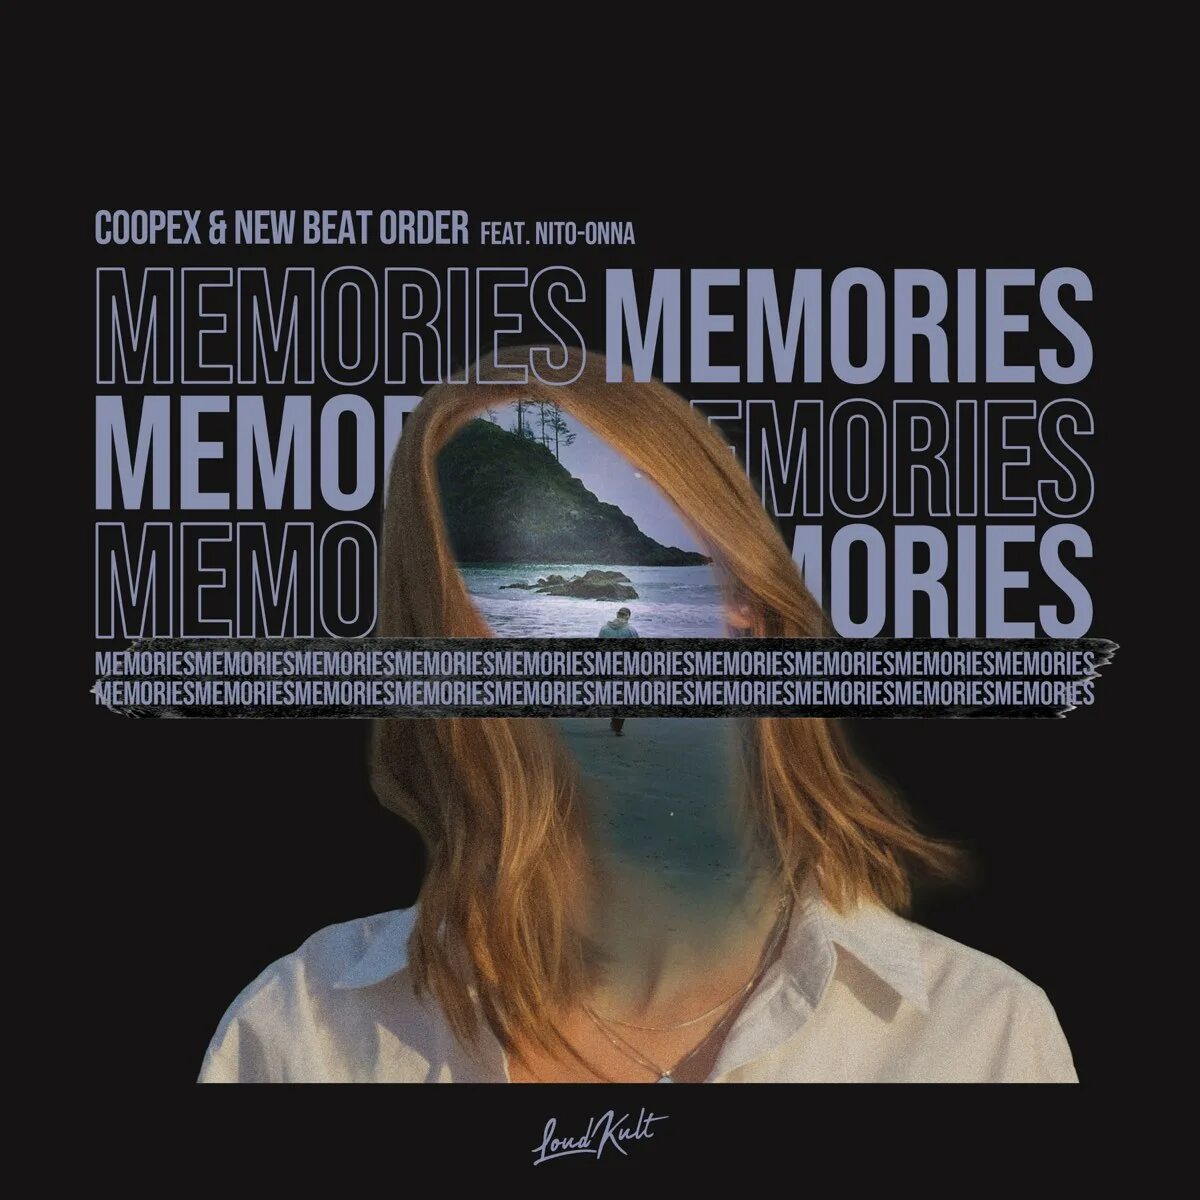 Memories Coopex, New Beat order, nito-Onna. New Beat order Memories Coopex. Coopex песни. Memories Coopex New Beat order Remix. Coopex new beat